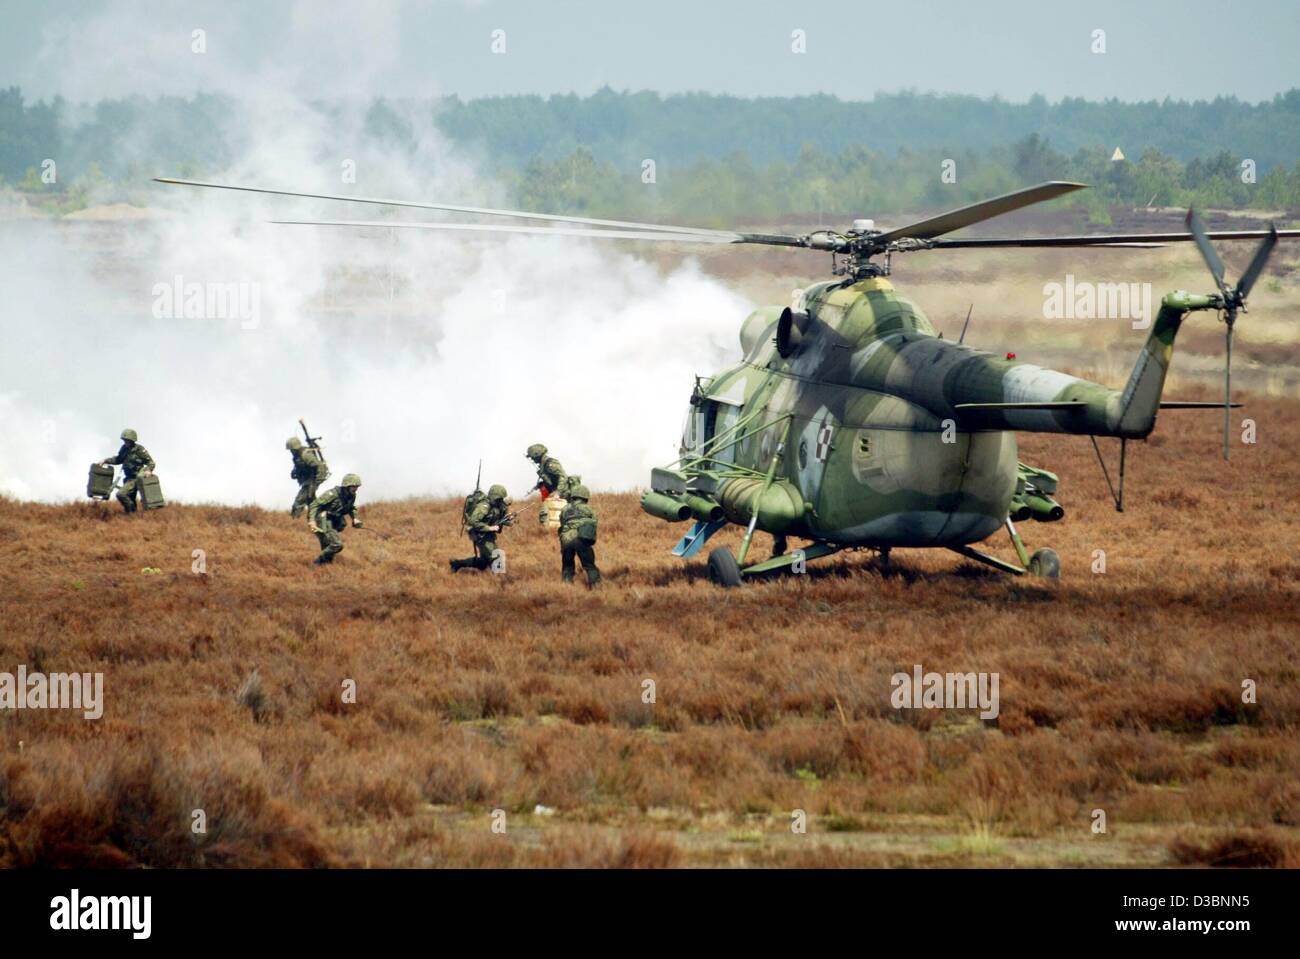 (dpa) - Polish soldiers get off a military helicopter, during a military drill of the Polish army under the leadership of German officers near the German border in Swietoszow, Poland, 14 May 2003. Poland has officially asked a NATO military study on possible alliance support for Poland's planned mil Stock Photo